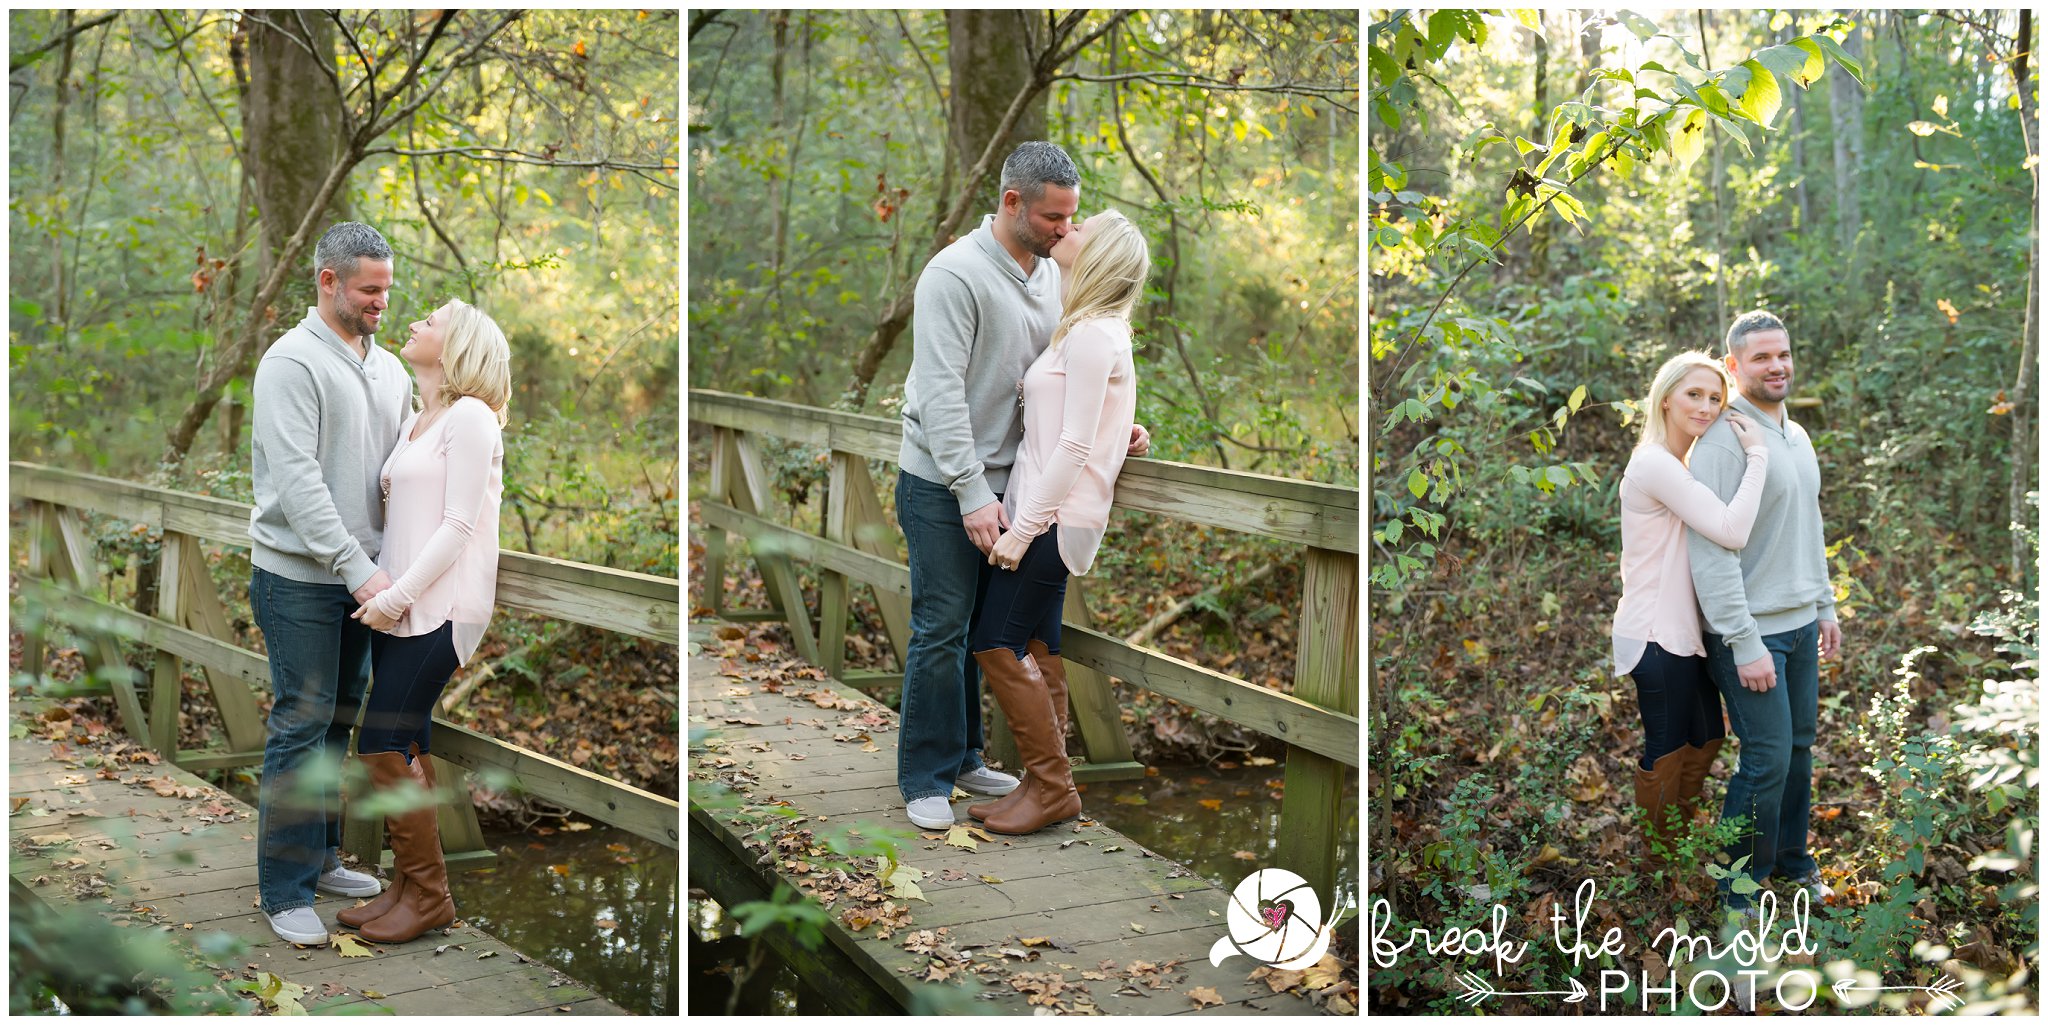 break-the-mold-photo-knoxville-tn-lenoir-city-downtown-outdoor-hiking-engagement-session_1994.jpg